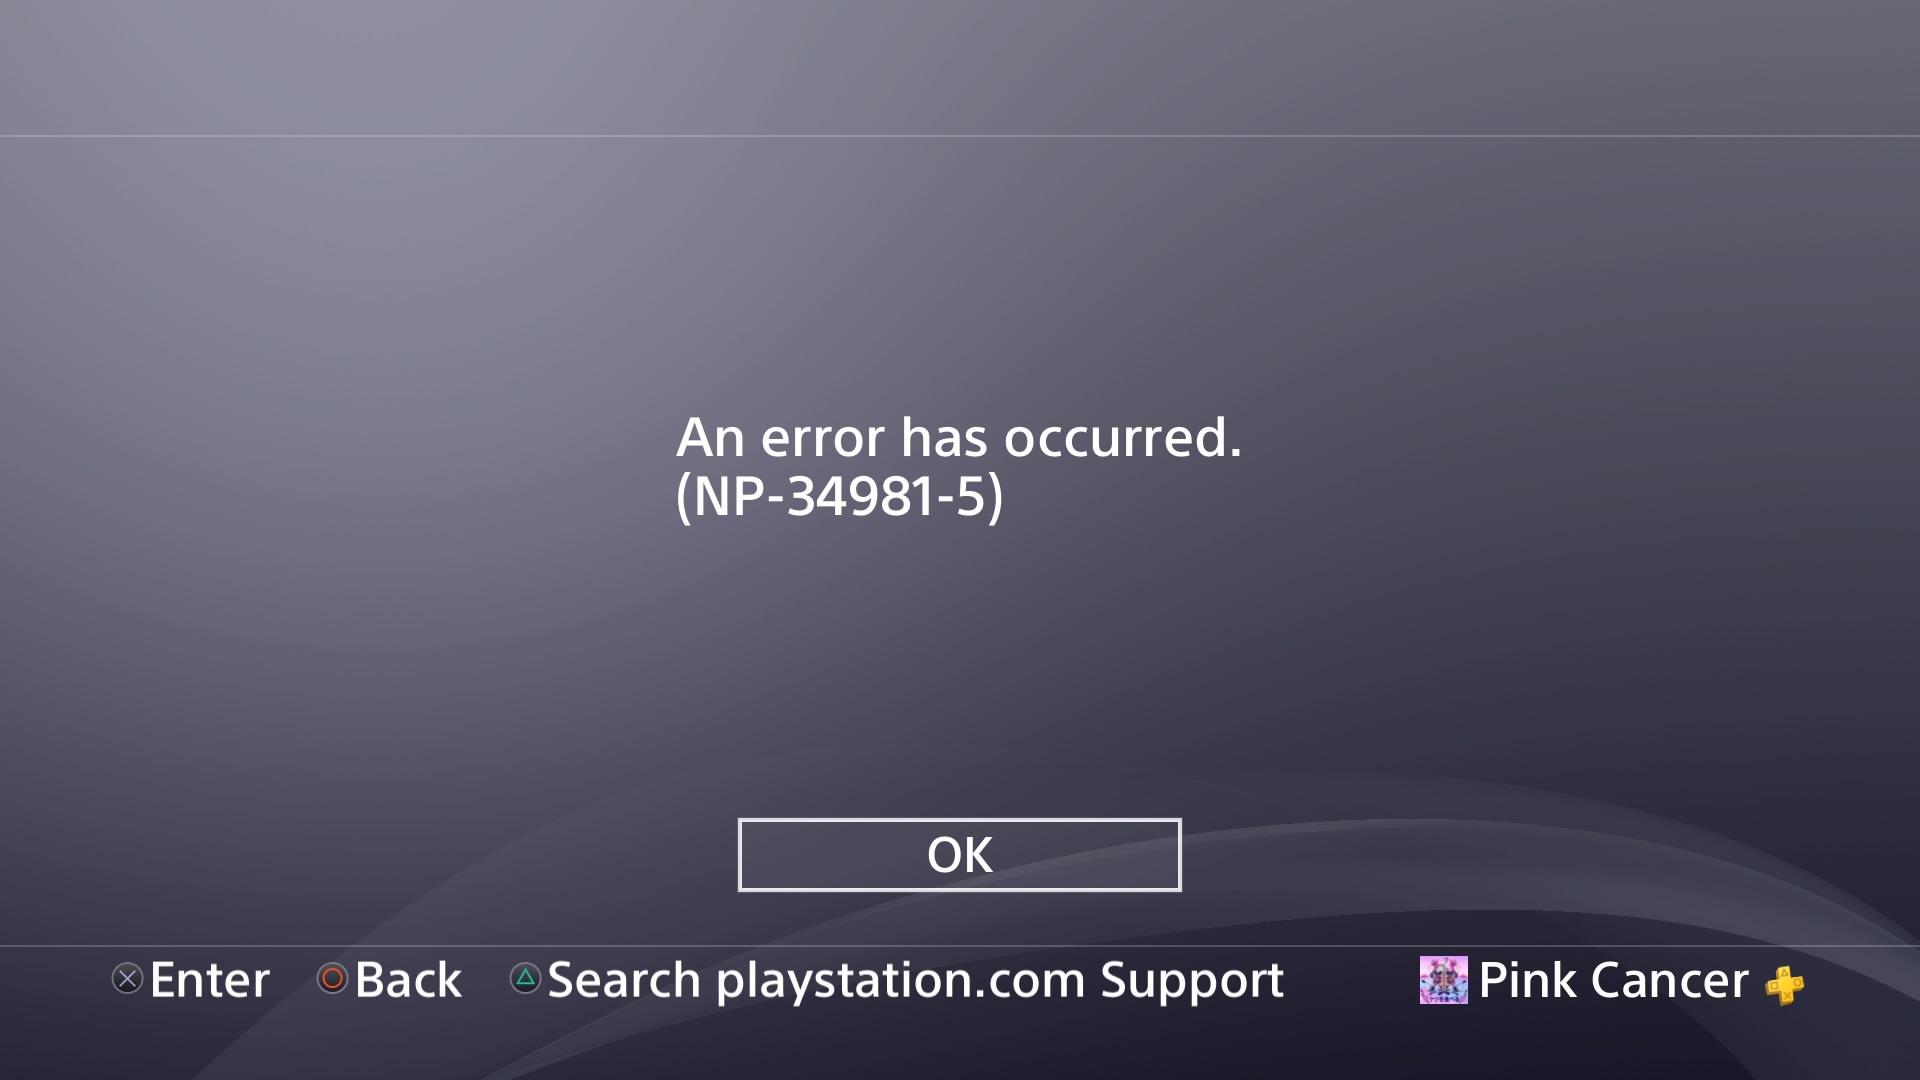 NP-34981-5 on the playstation 4